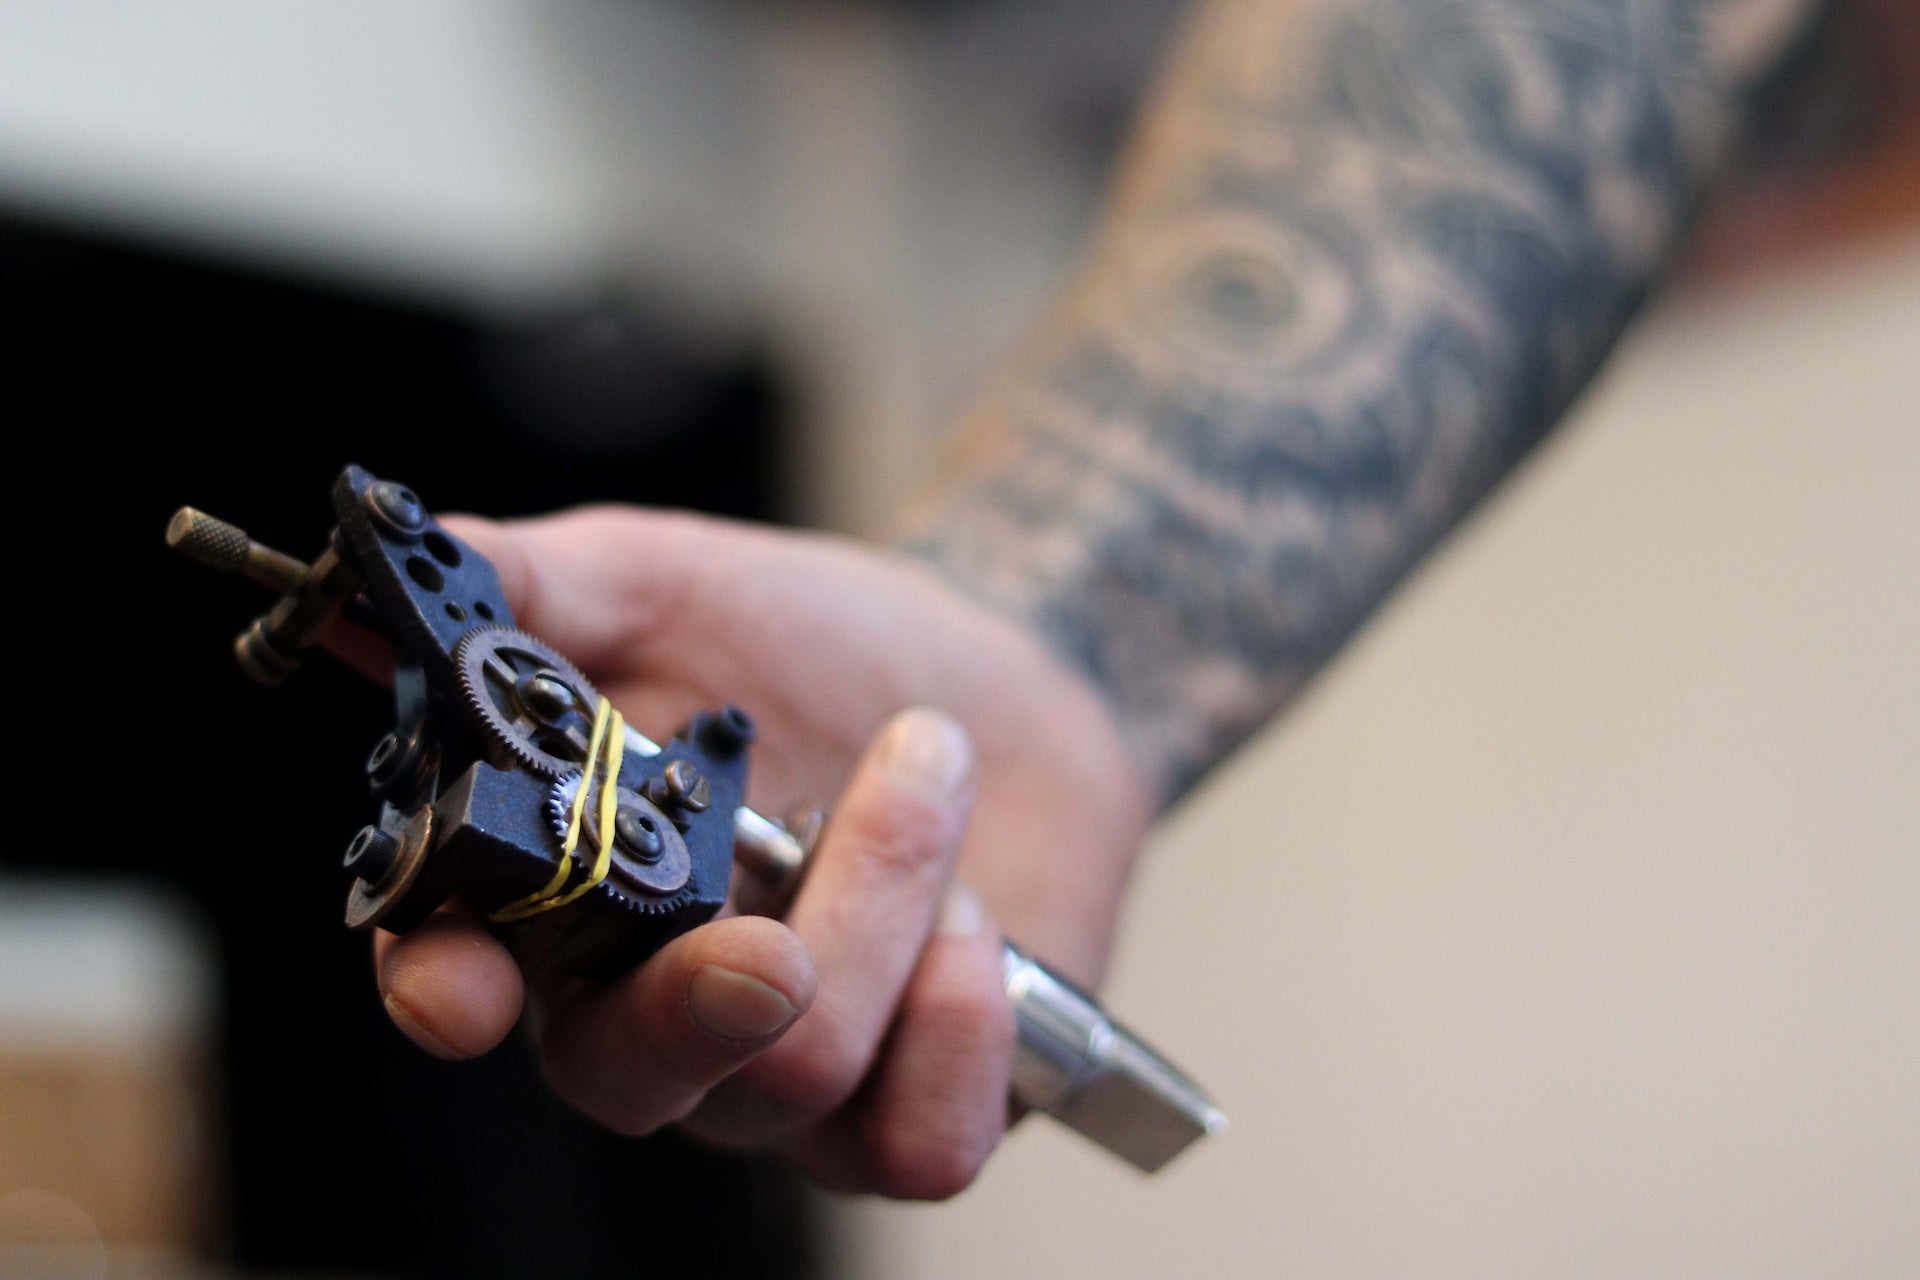 How to Put a Tattoo Gun Together?